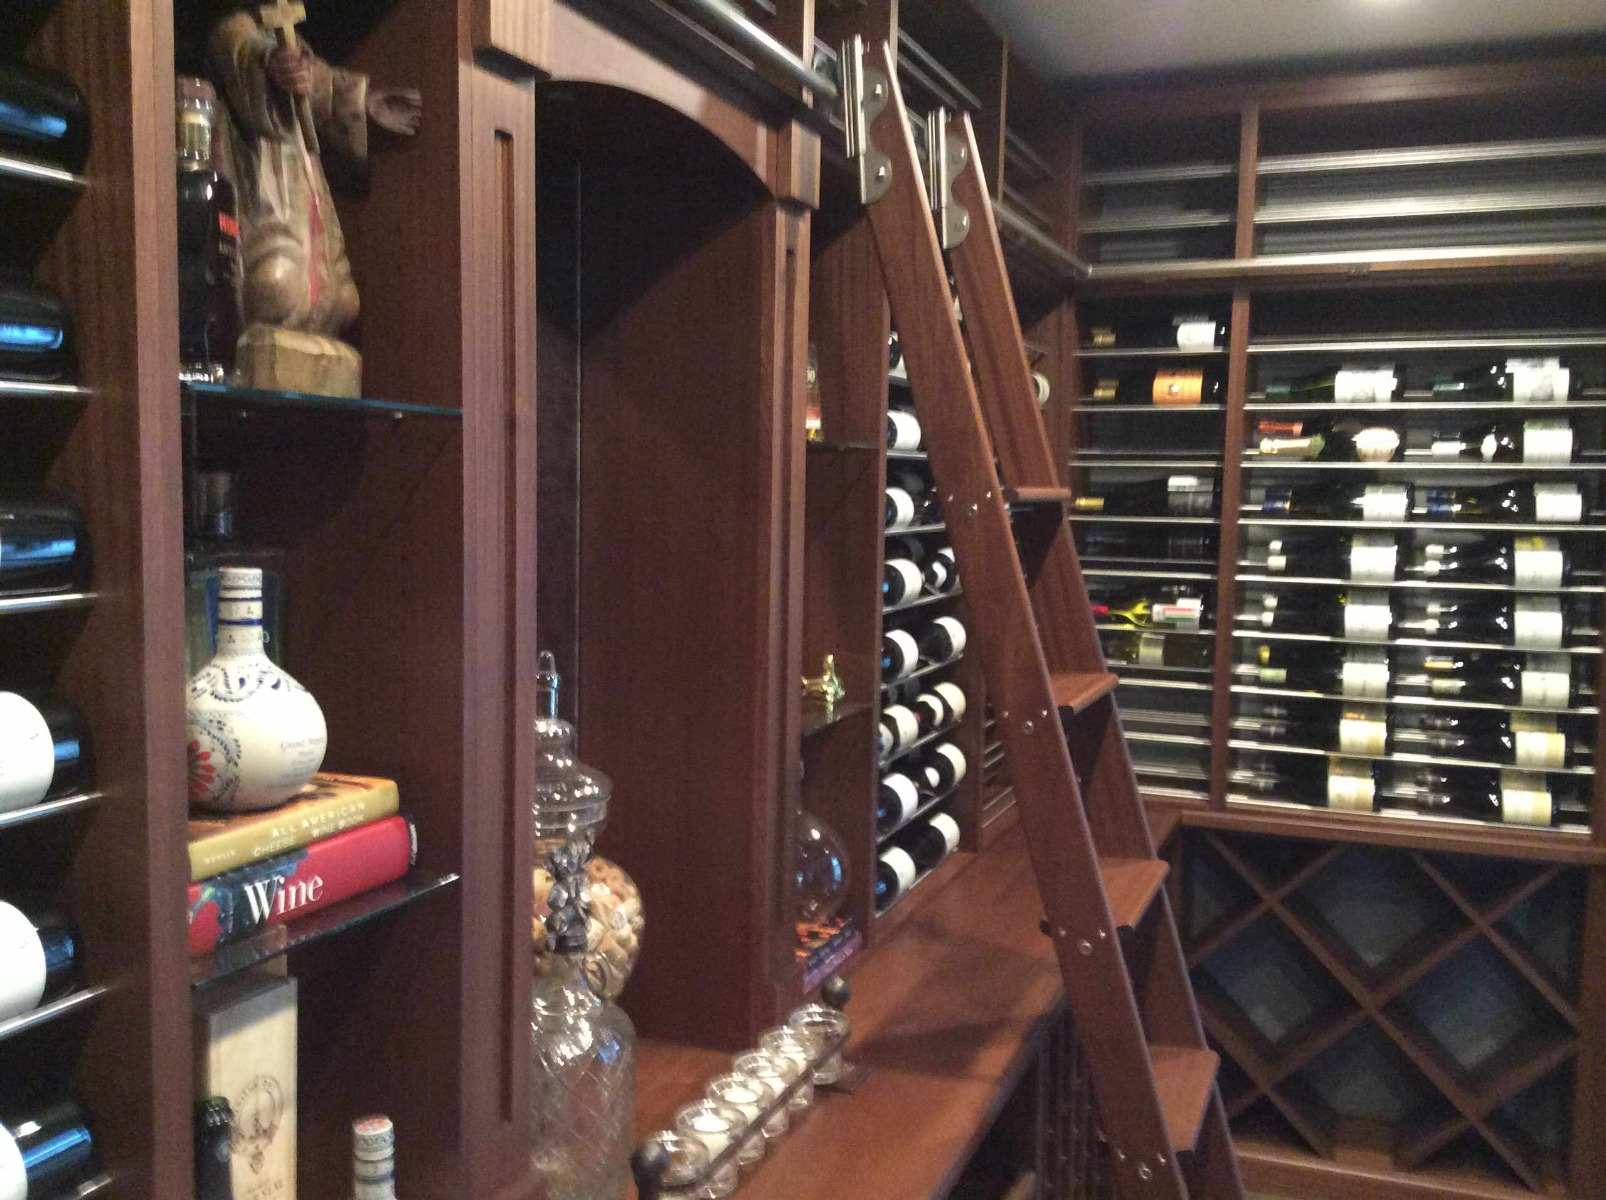 Wood and metal for the wine racks with library rolling ladder